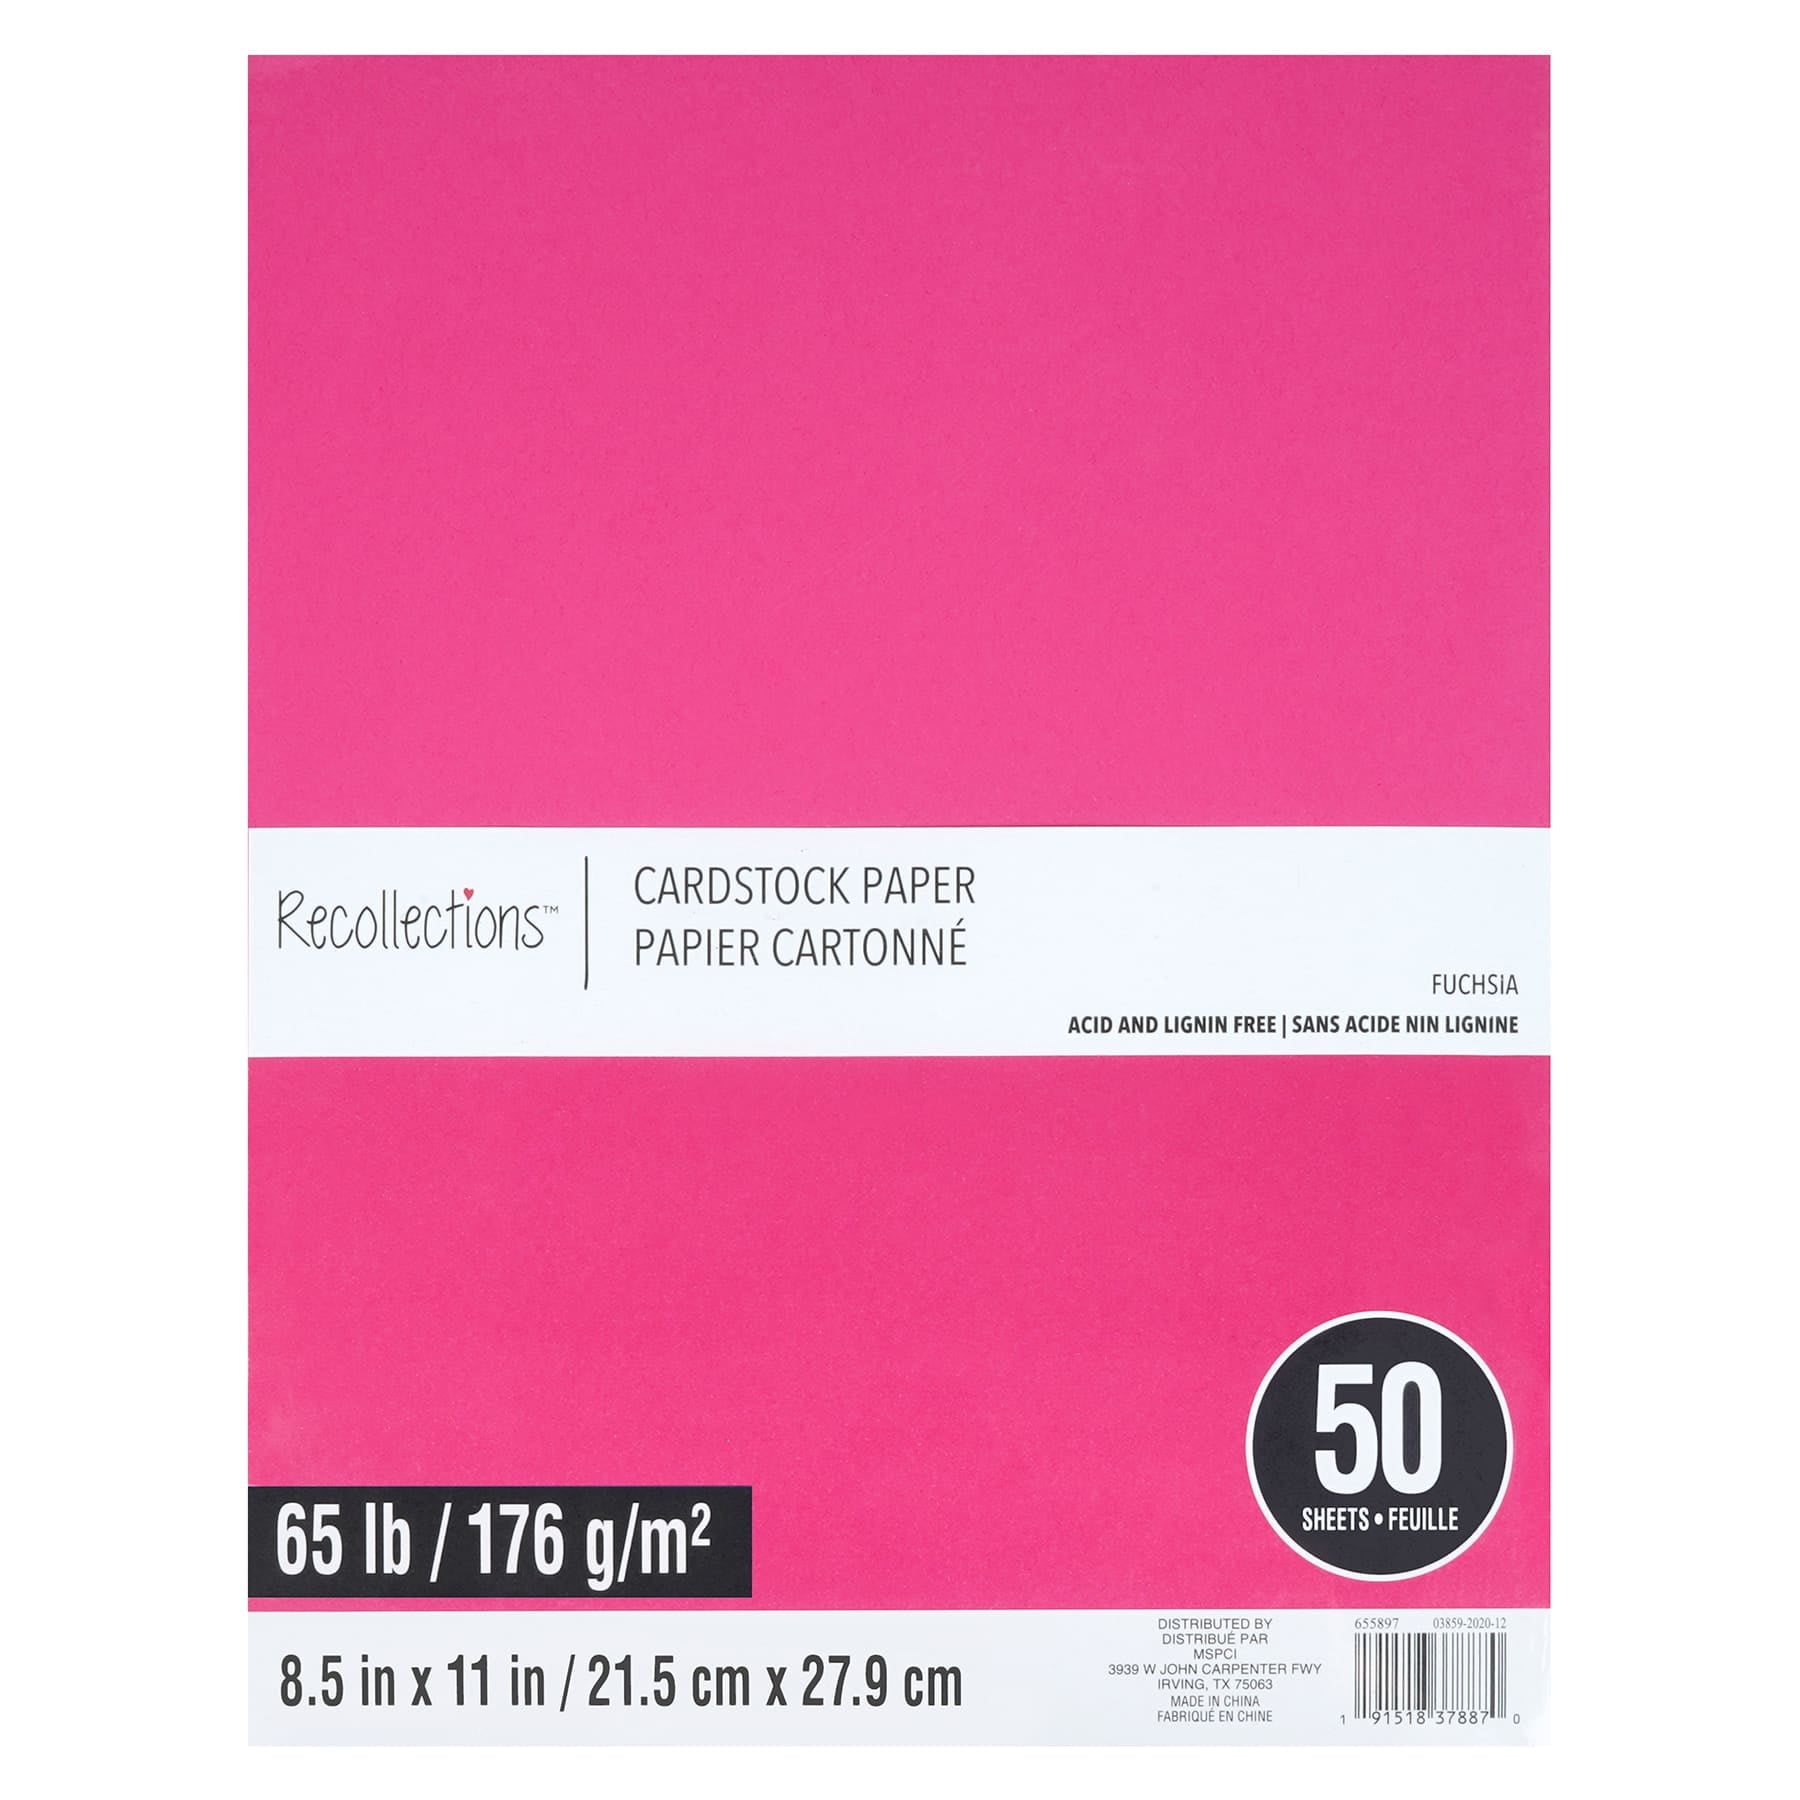 12 Packs: 100 ct. (1,200 total) White Dove 5.5 x 7.5 Cardstock Paper by  Recollections™